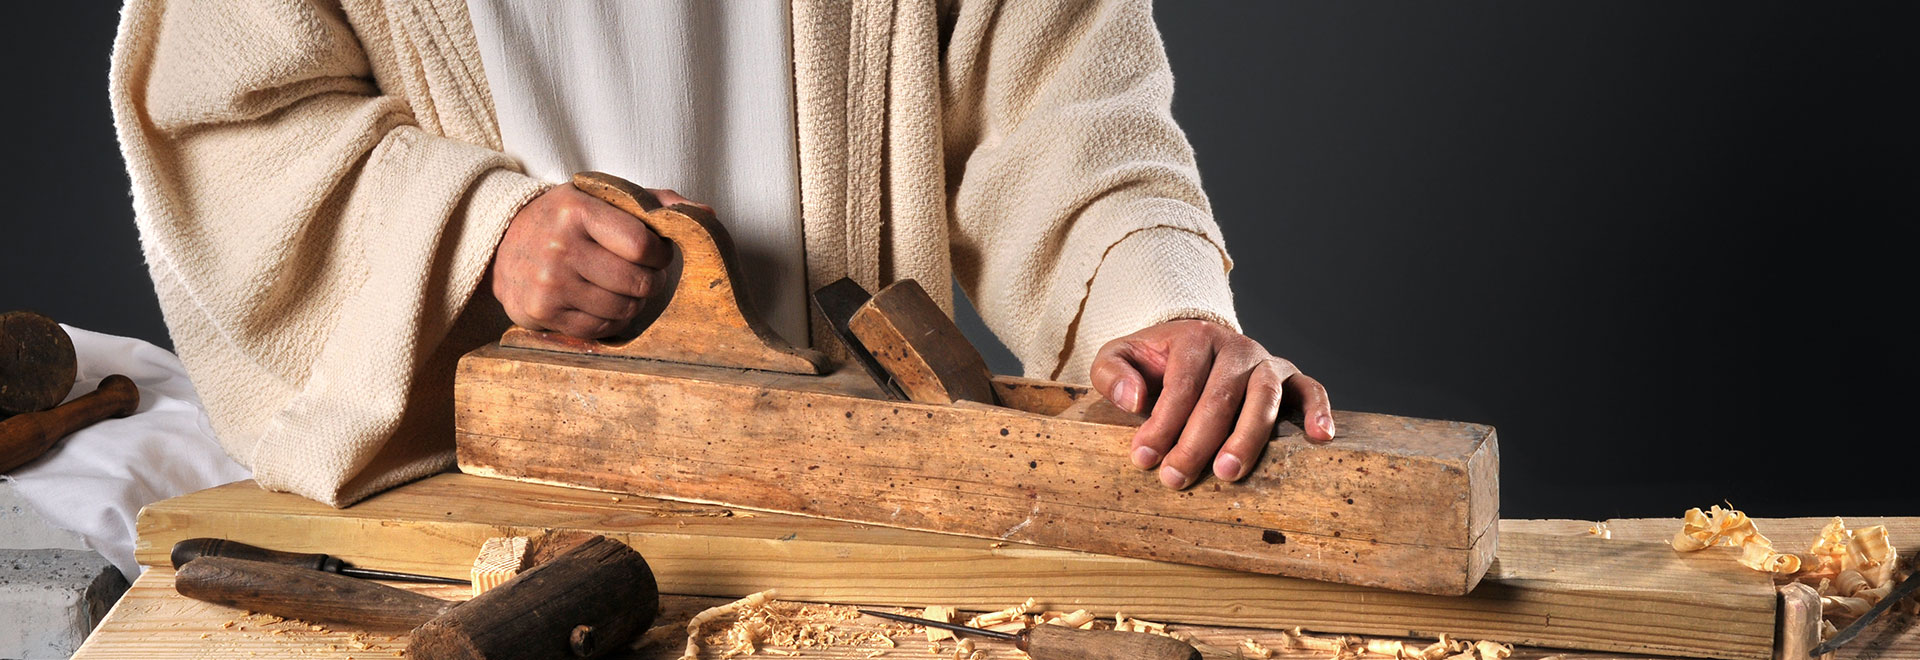 a carpenter dressed in an old robe like Jesus wood working with old hand tools